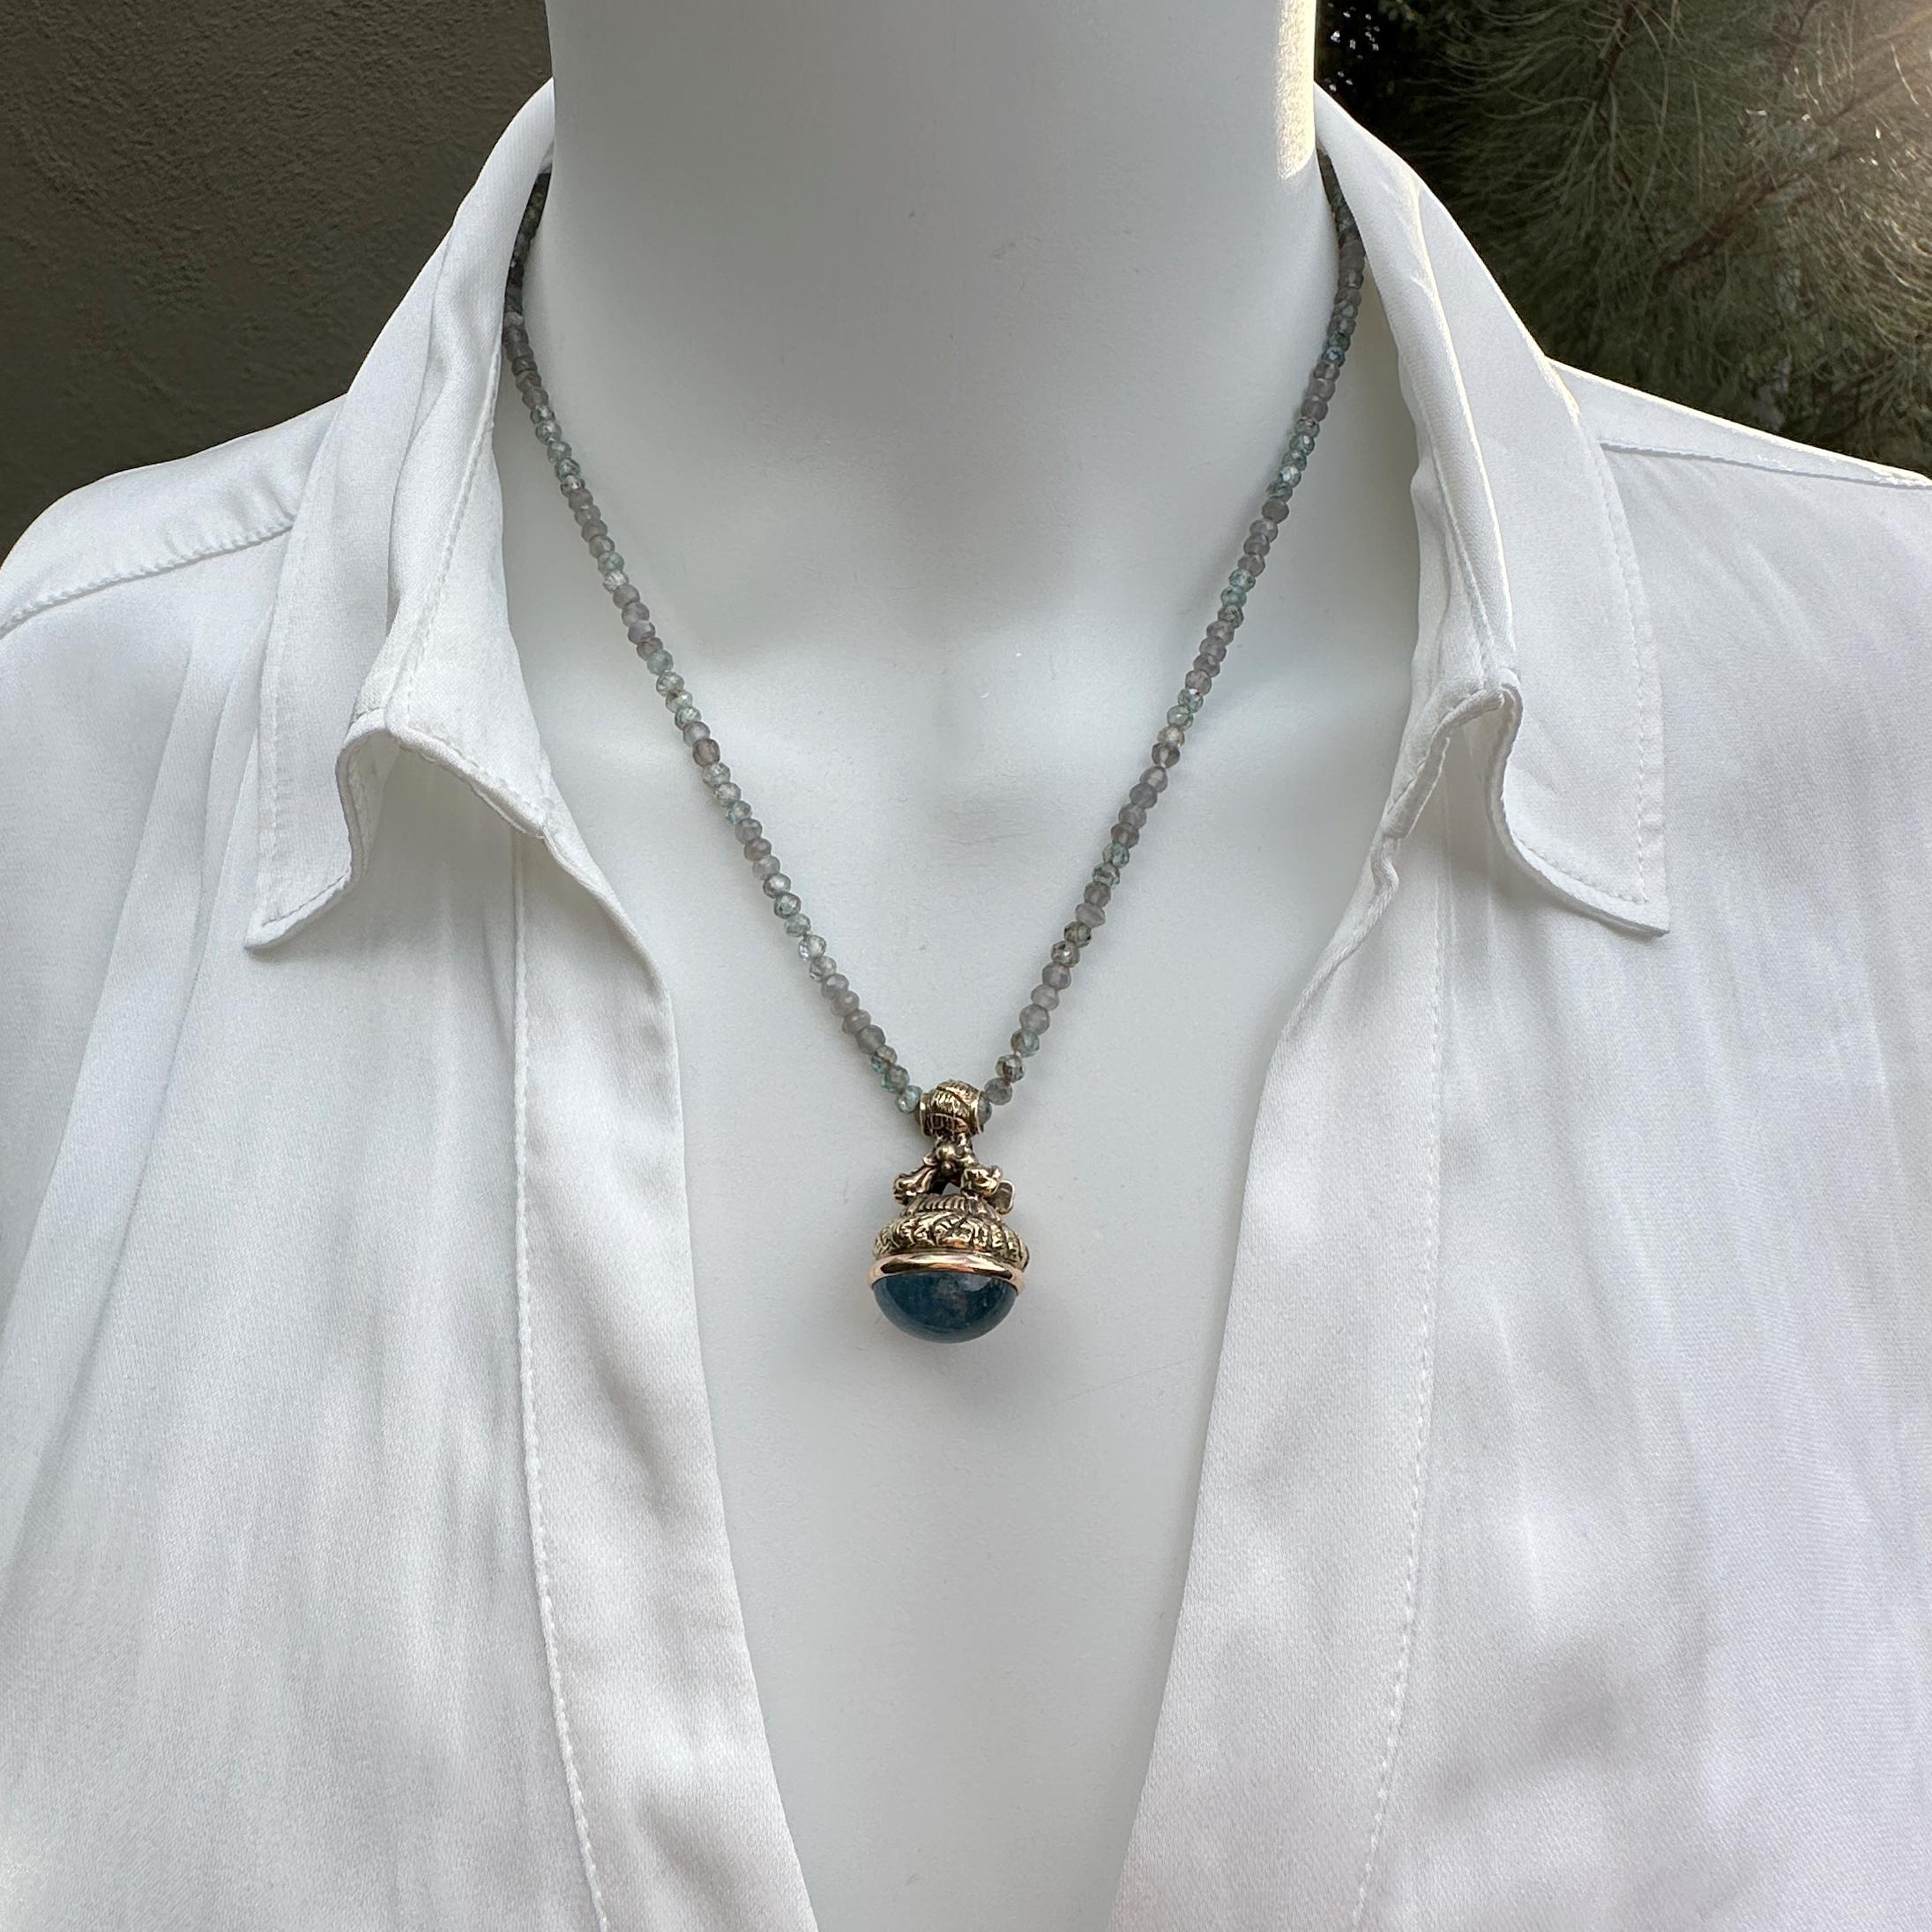 Eytan Brandes cast an old bronze seal in 14 karat yellow gold and converted it to a pendant, holding an oval cabochon of natural stormy blue aquamarine.  It hangs on a shimmery necklace of blue and grey beads -- a twilight mixture of moonstone and